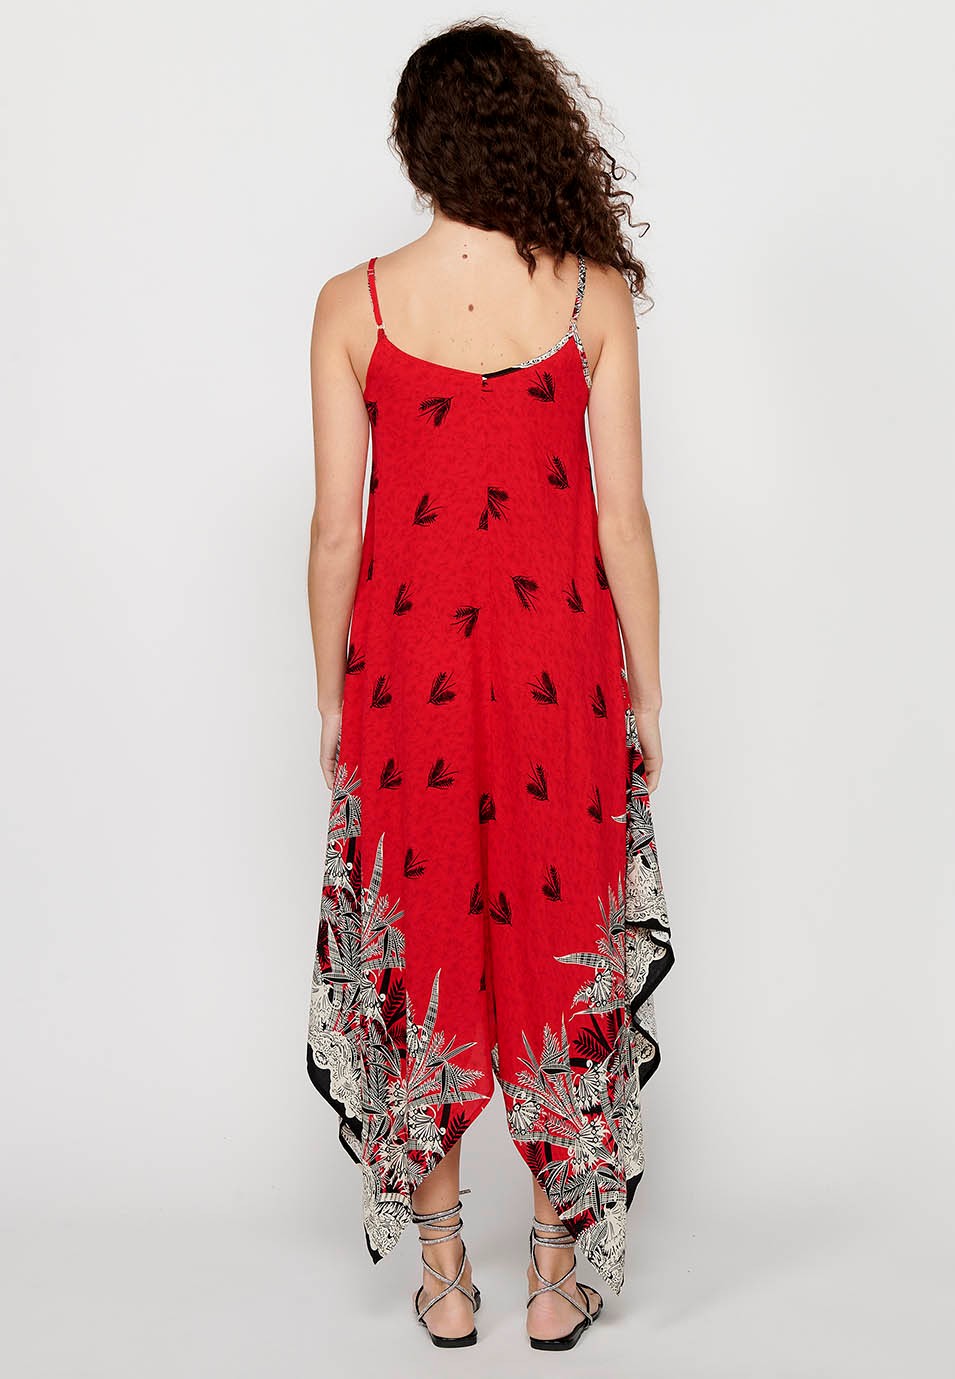 Strap Dress with V-neckline and Red Floral Print for Women 4